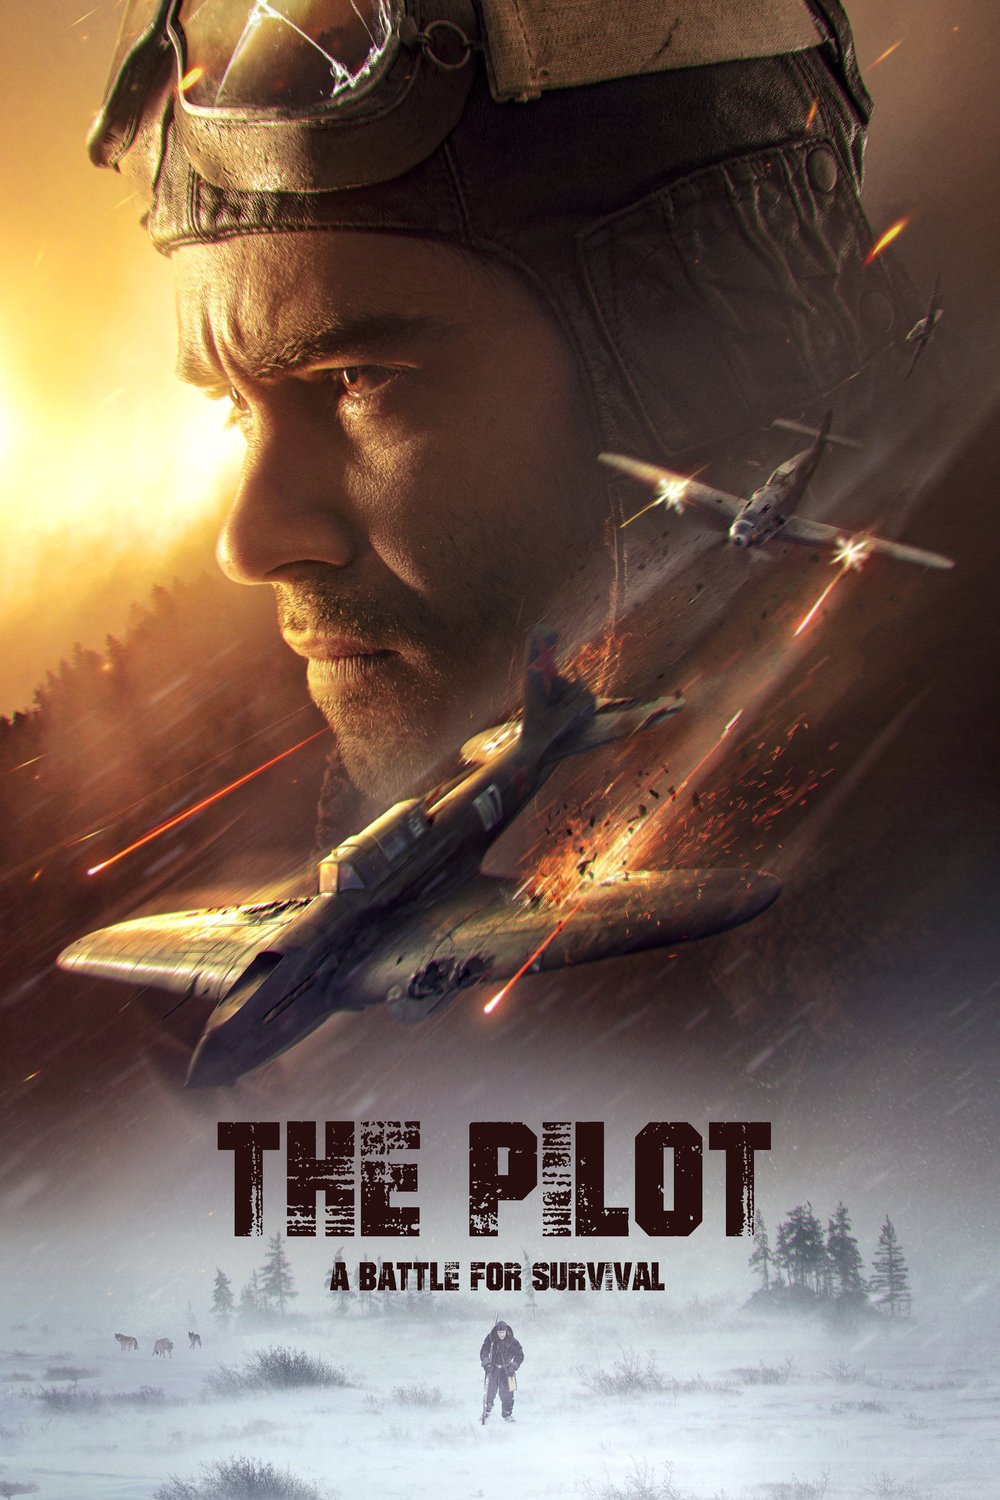 Poster of the movie The Pilot. A Battle for Survival